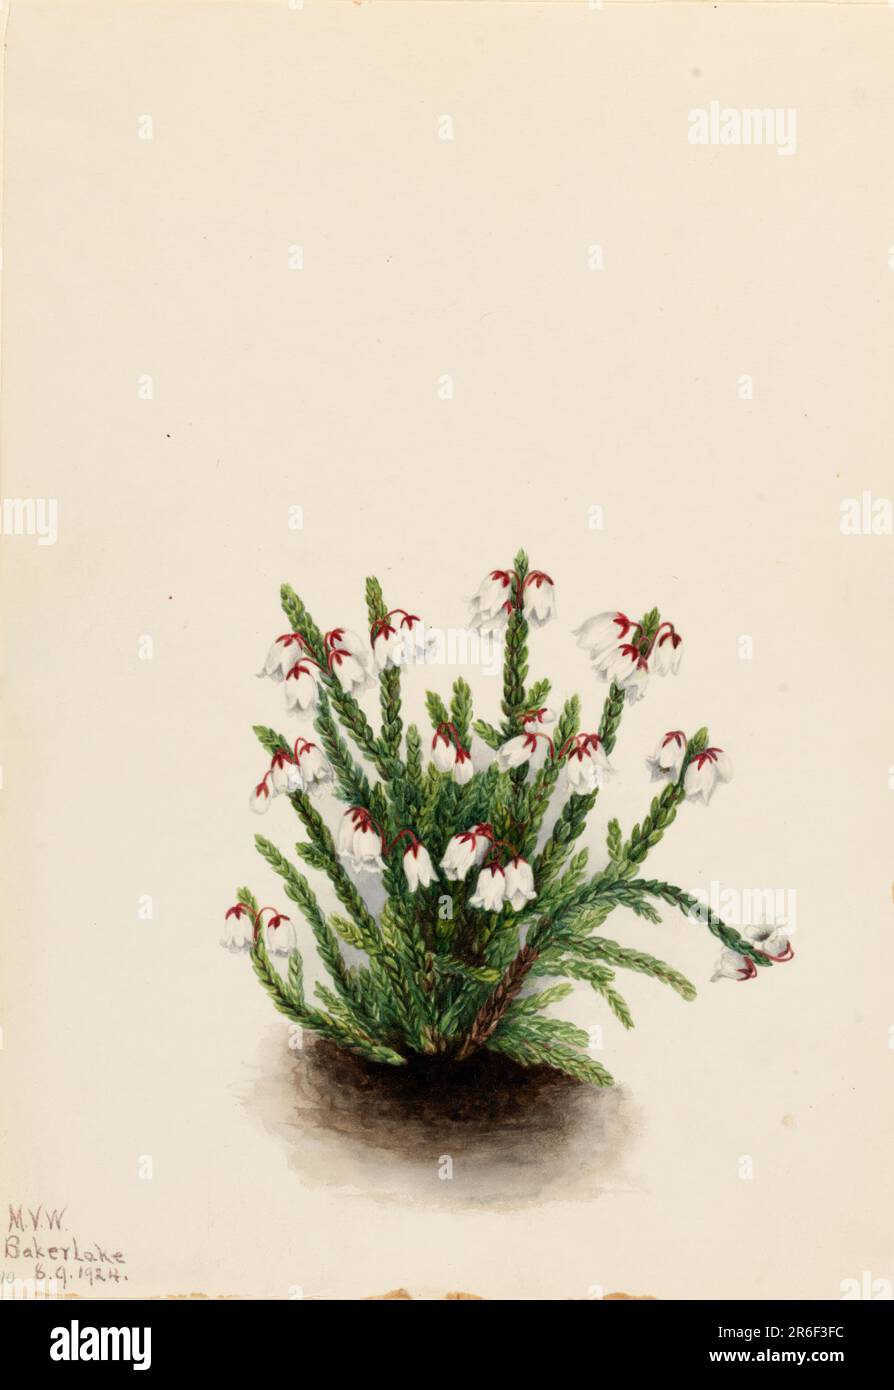 Rocky Mountain Cassiope (Cassiope mertensiana). Date: 1924. Watercolor on paper. Museum: Smithsonian American Art Museum. Stock Photo